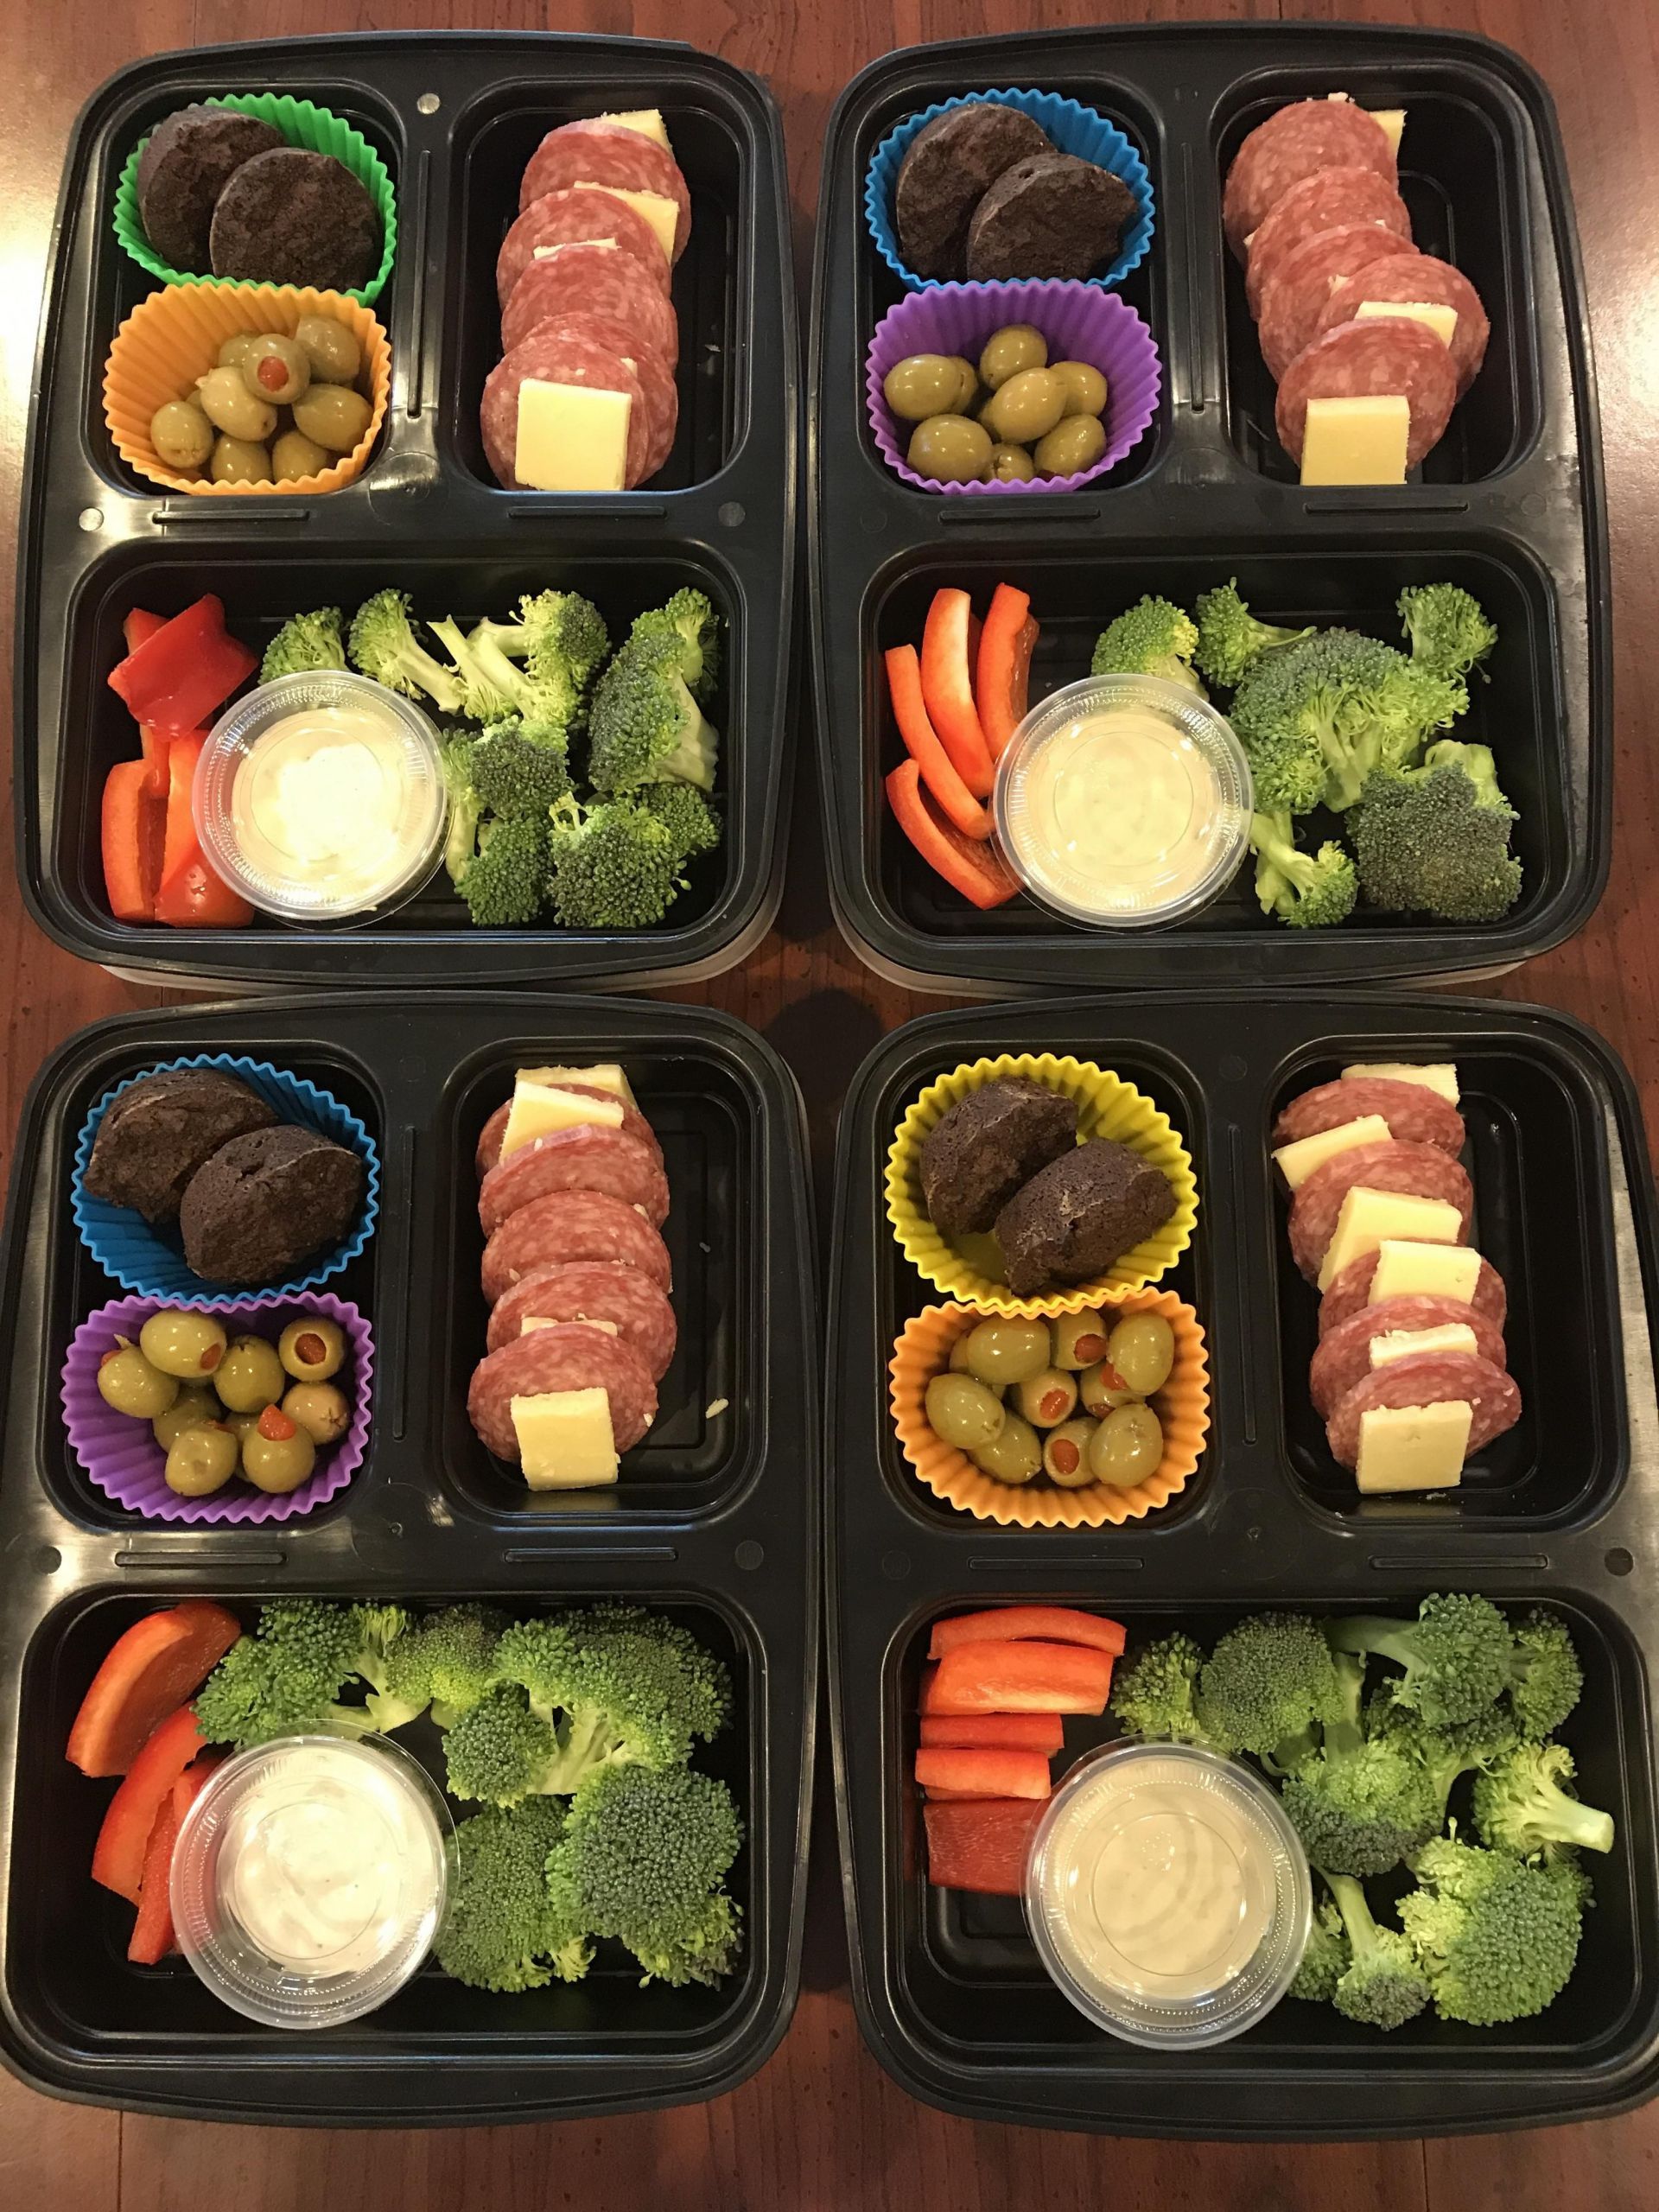 Keto Diet Meal Prep Lunch Ideas
 I made my "adult lunchable" keto friendly